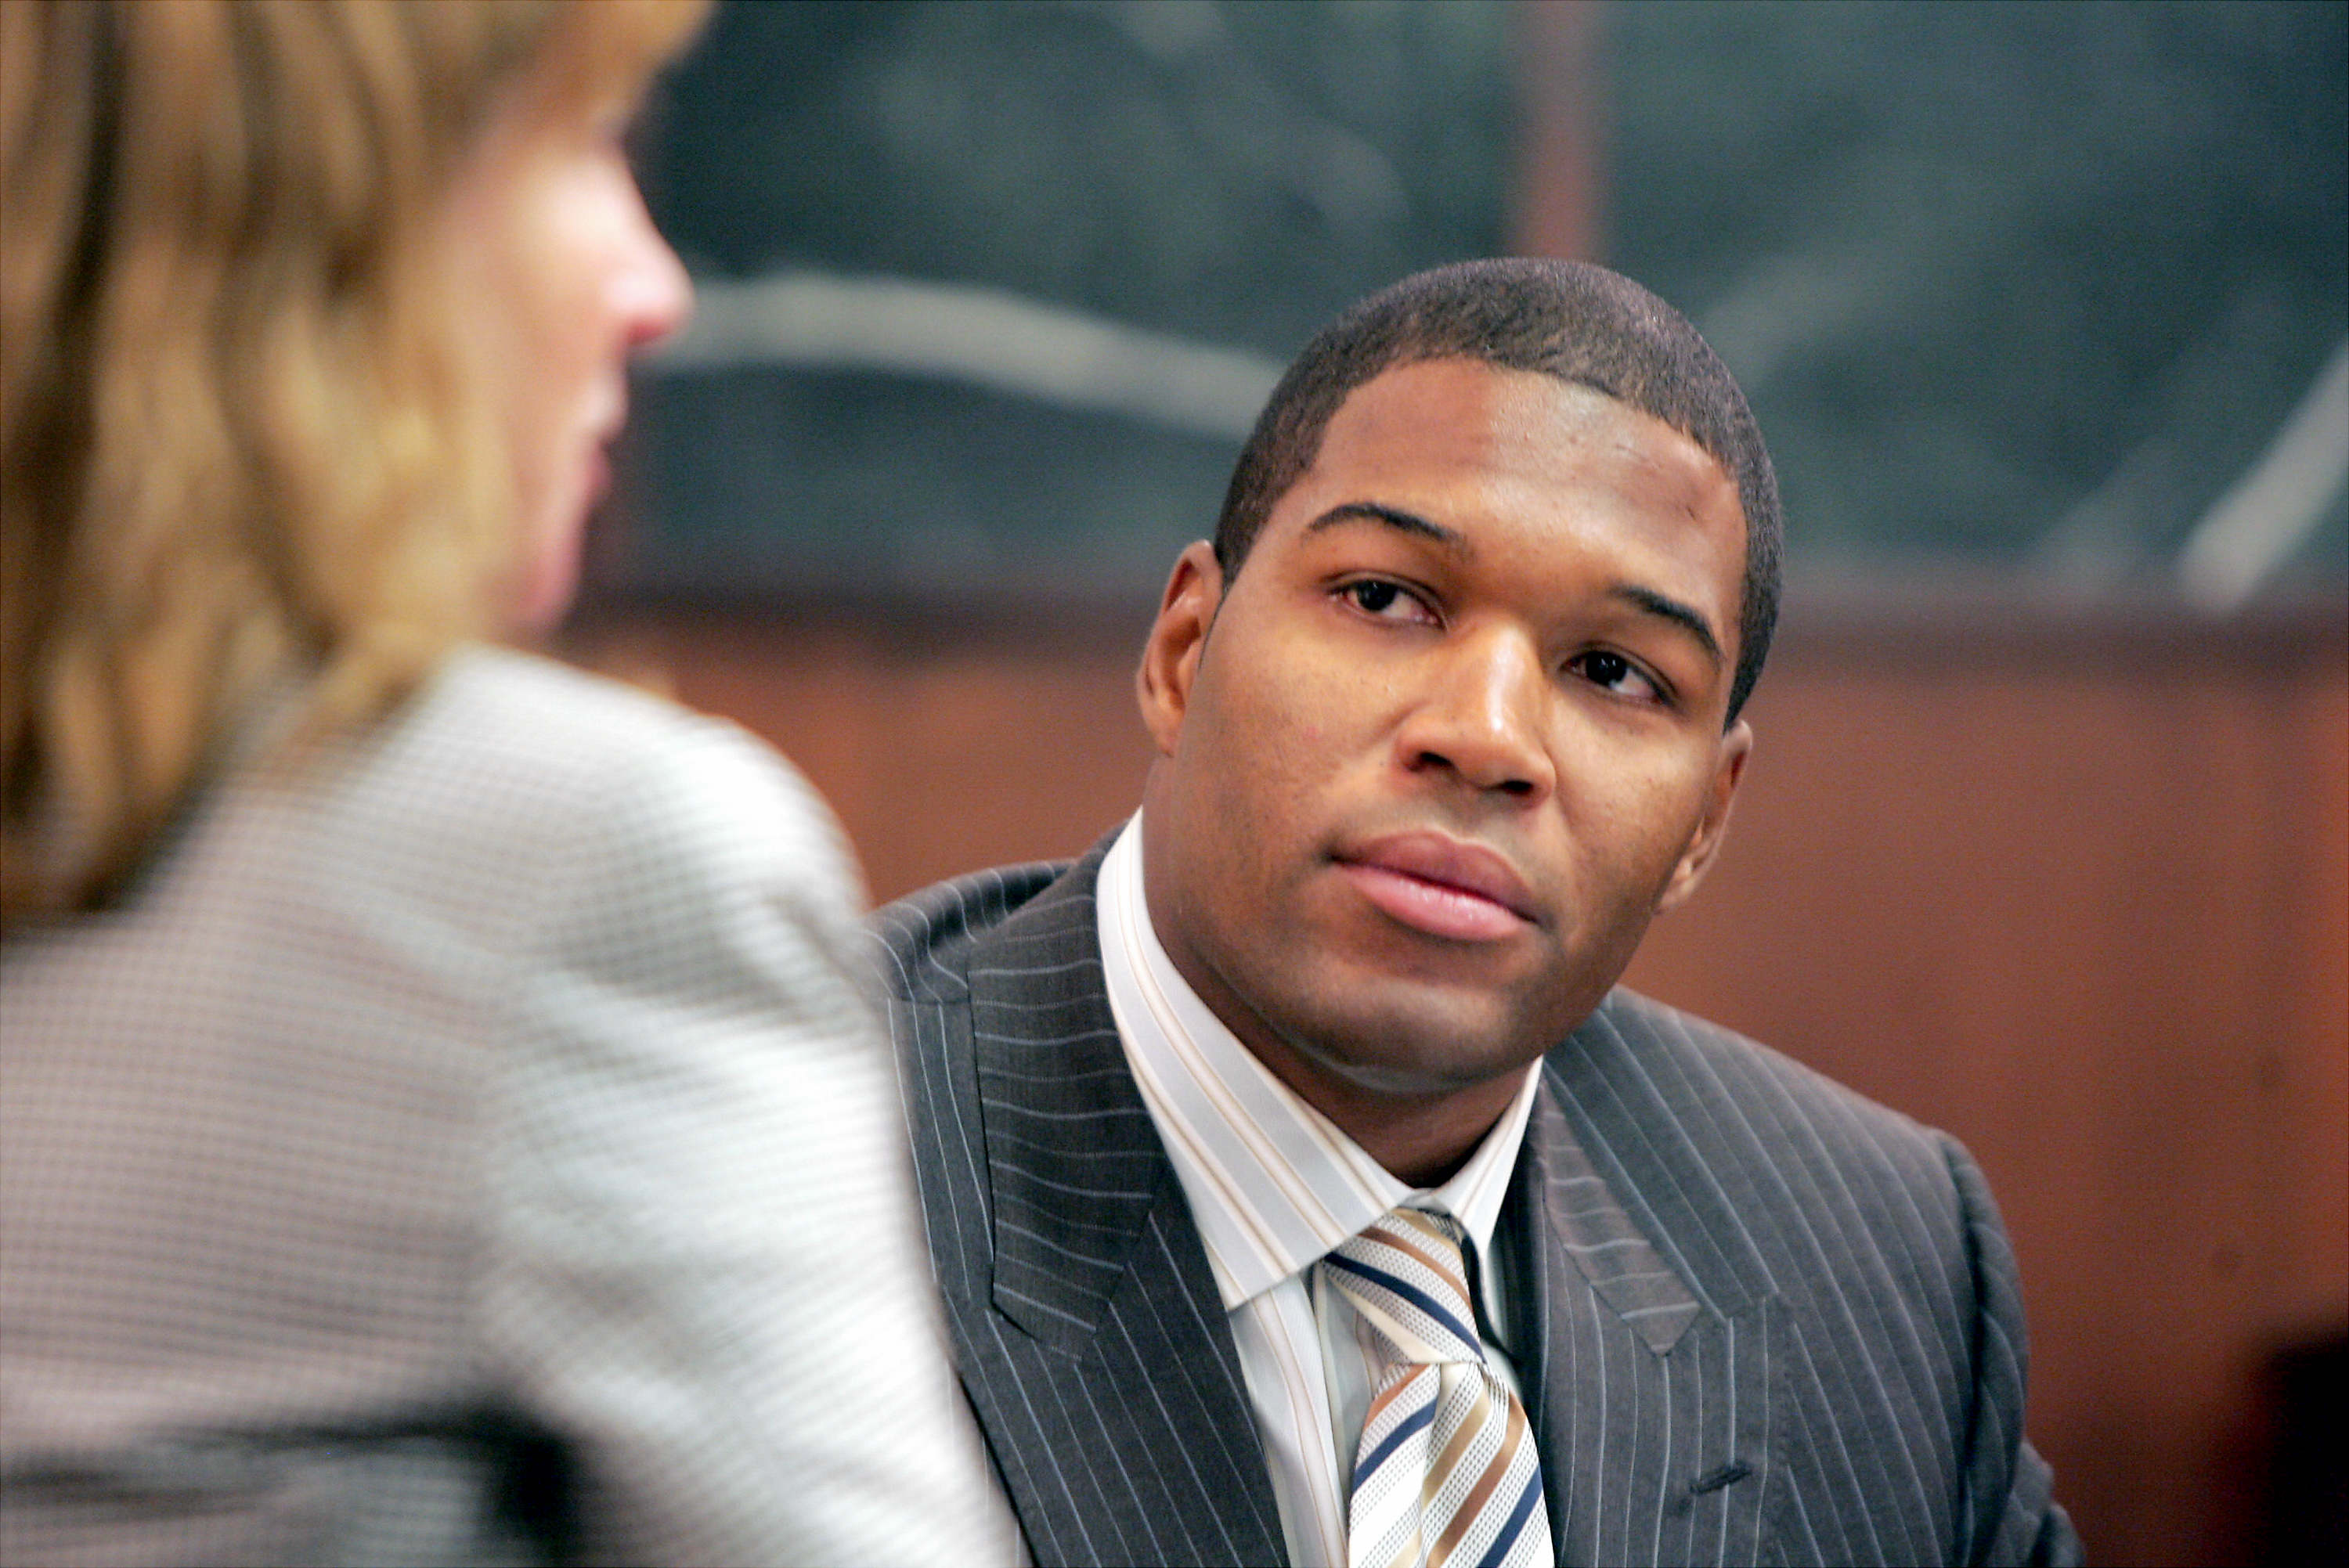 Michael Strahan on the last day of divorce proceedings with his estranged wife, Jean Muggli, in Newark, New Jersey on July 20, 2006. | Source: Michael Albans/NY Daily News Archive/Getty Images